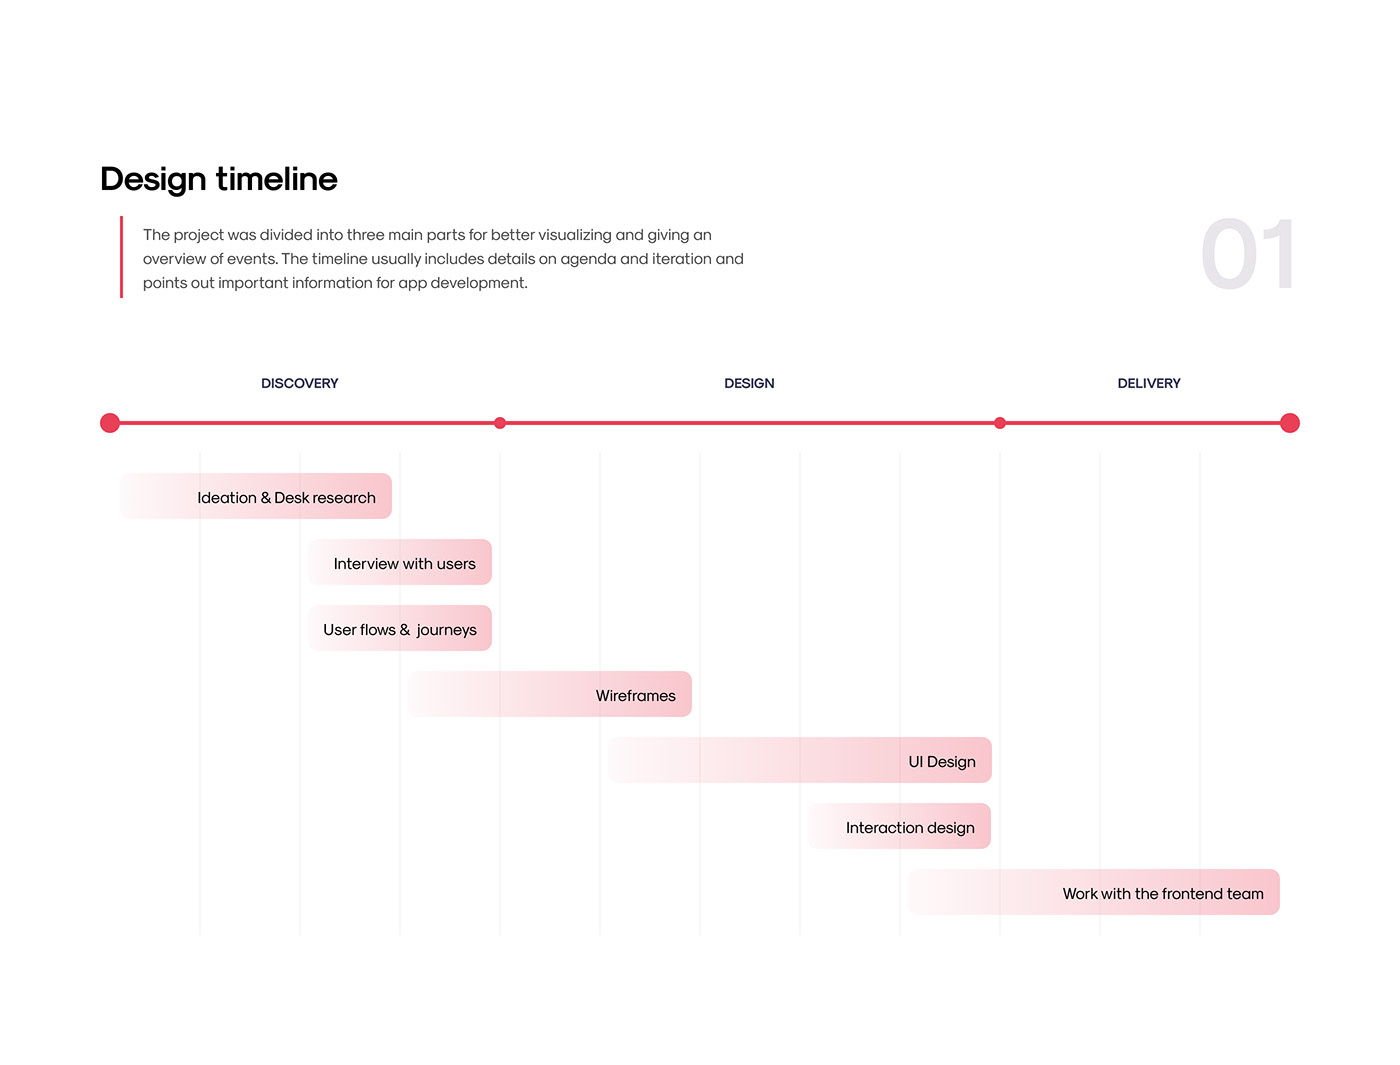 Design timeline of the projects